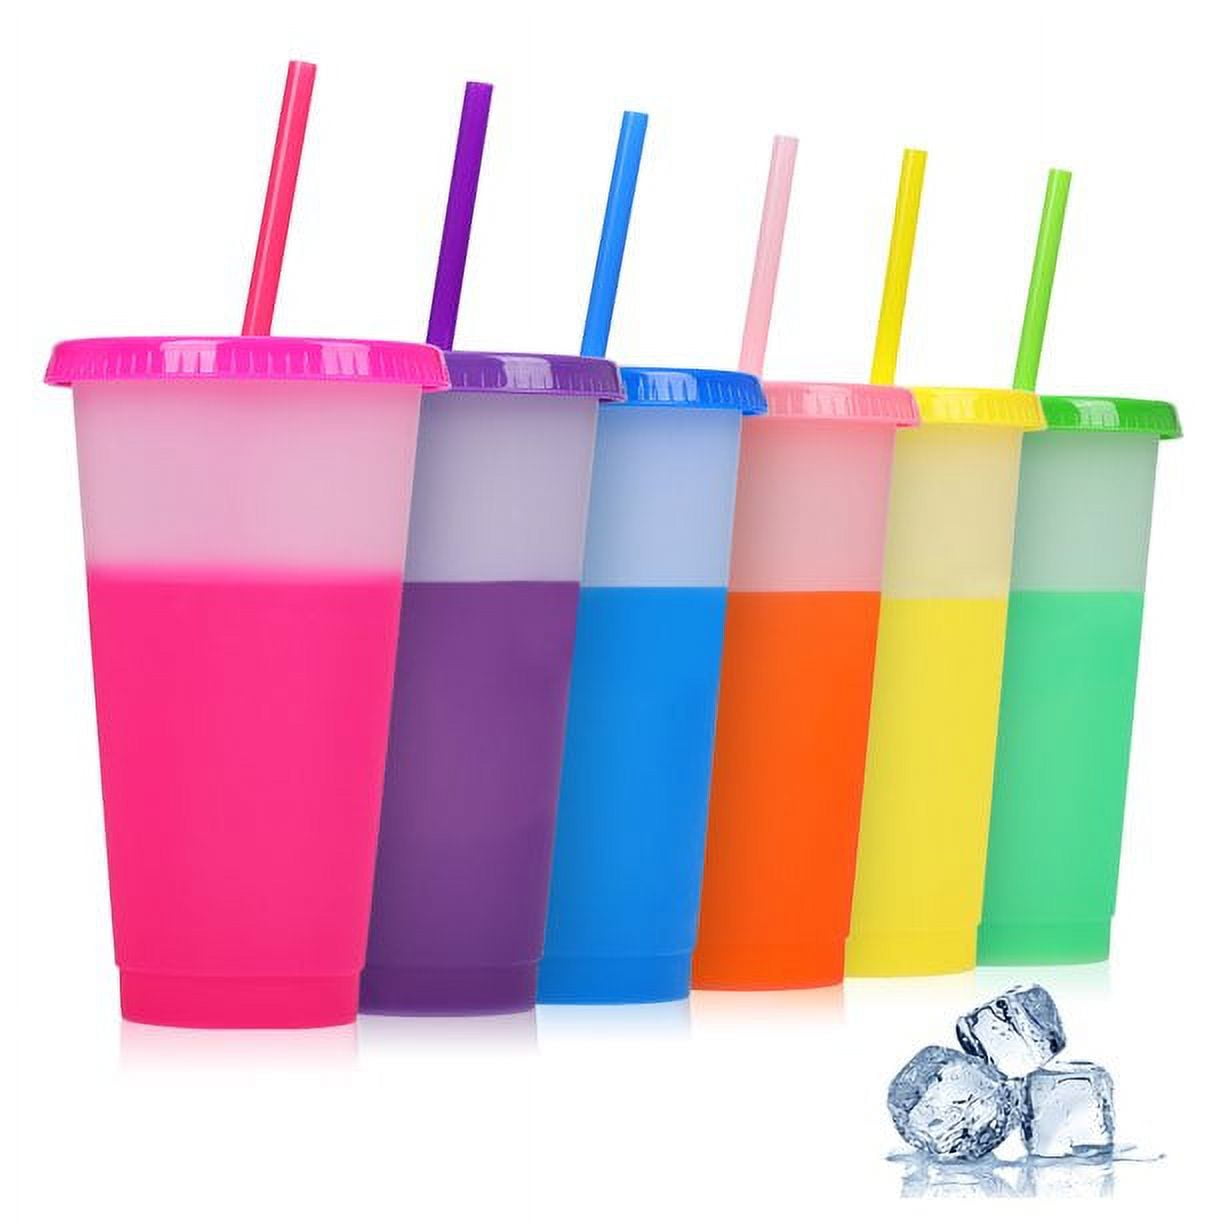 Cups with Lids and Straws - 17 oz Plastic Tumblers with Lids and Straws Bulk, Kids Cups with Straws and Lids for Girls Boys Party Smoothie, Reusable